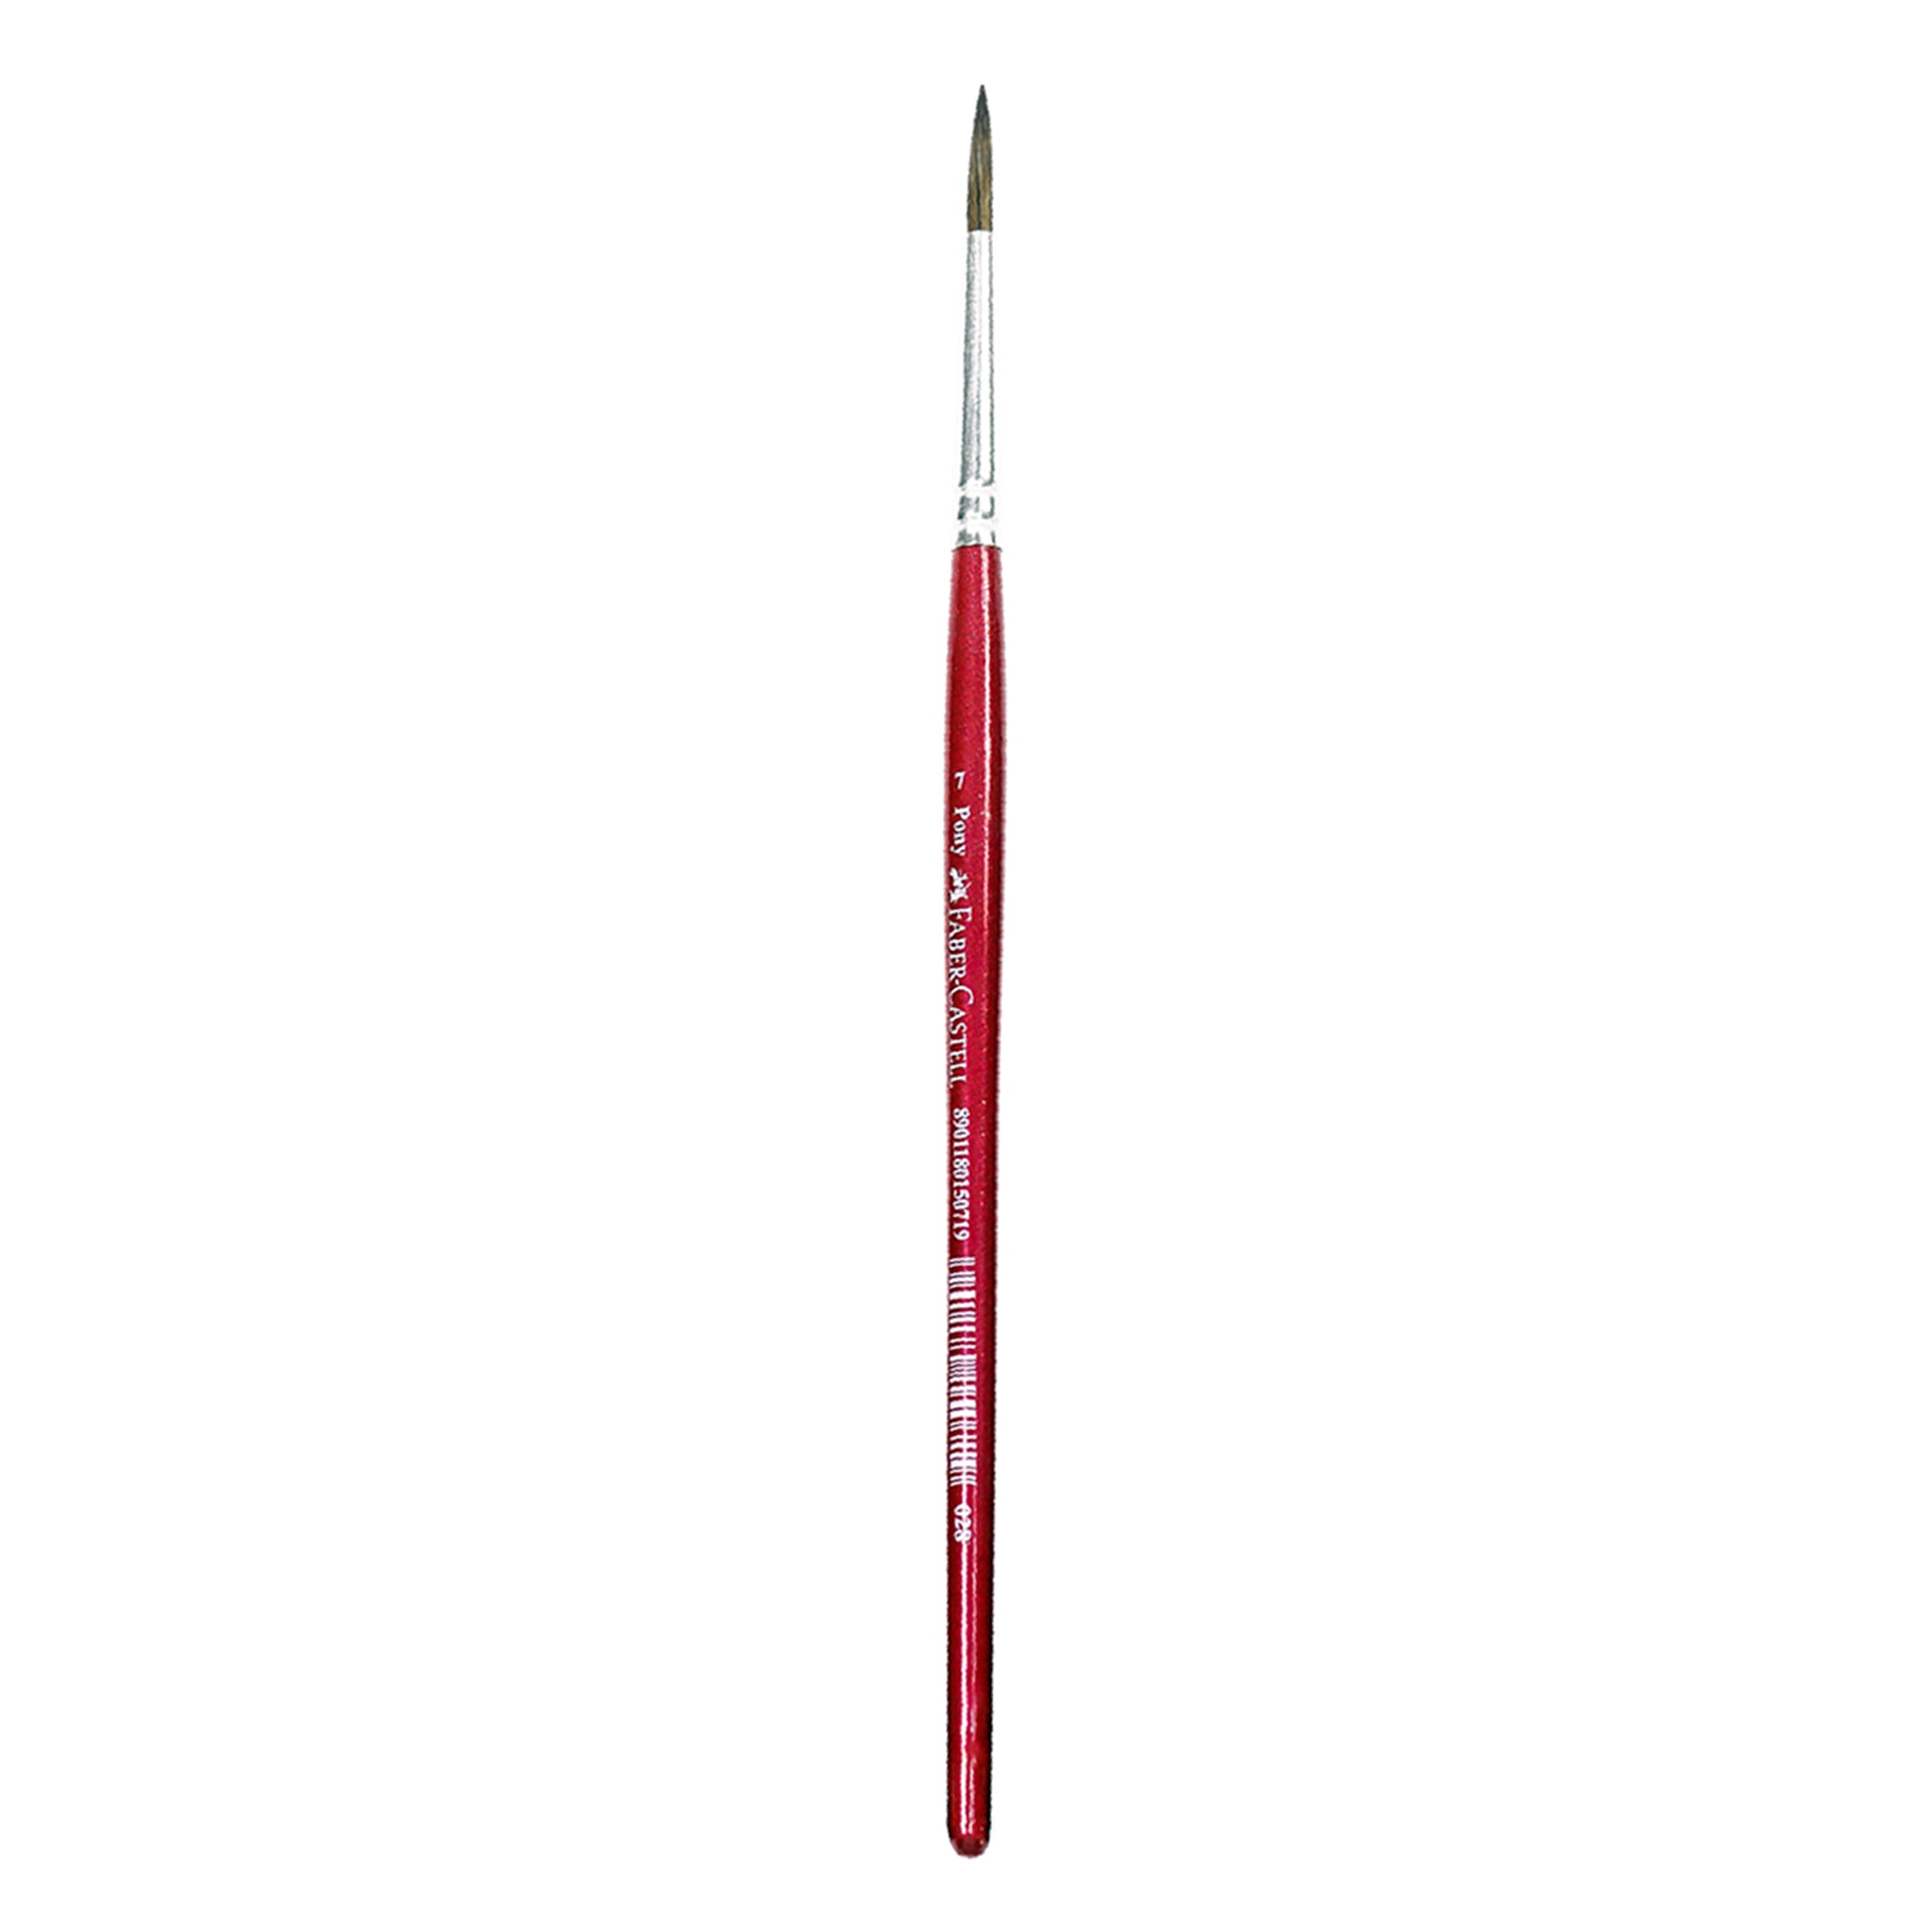 Faber Castell Paint Brush - Pony Hair Round Size 7, 1pc